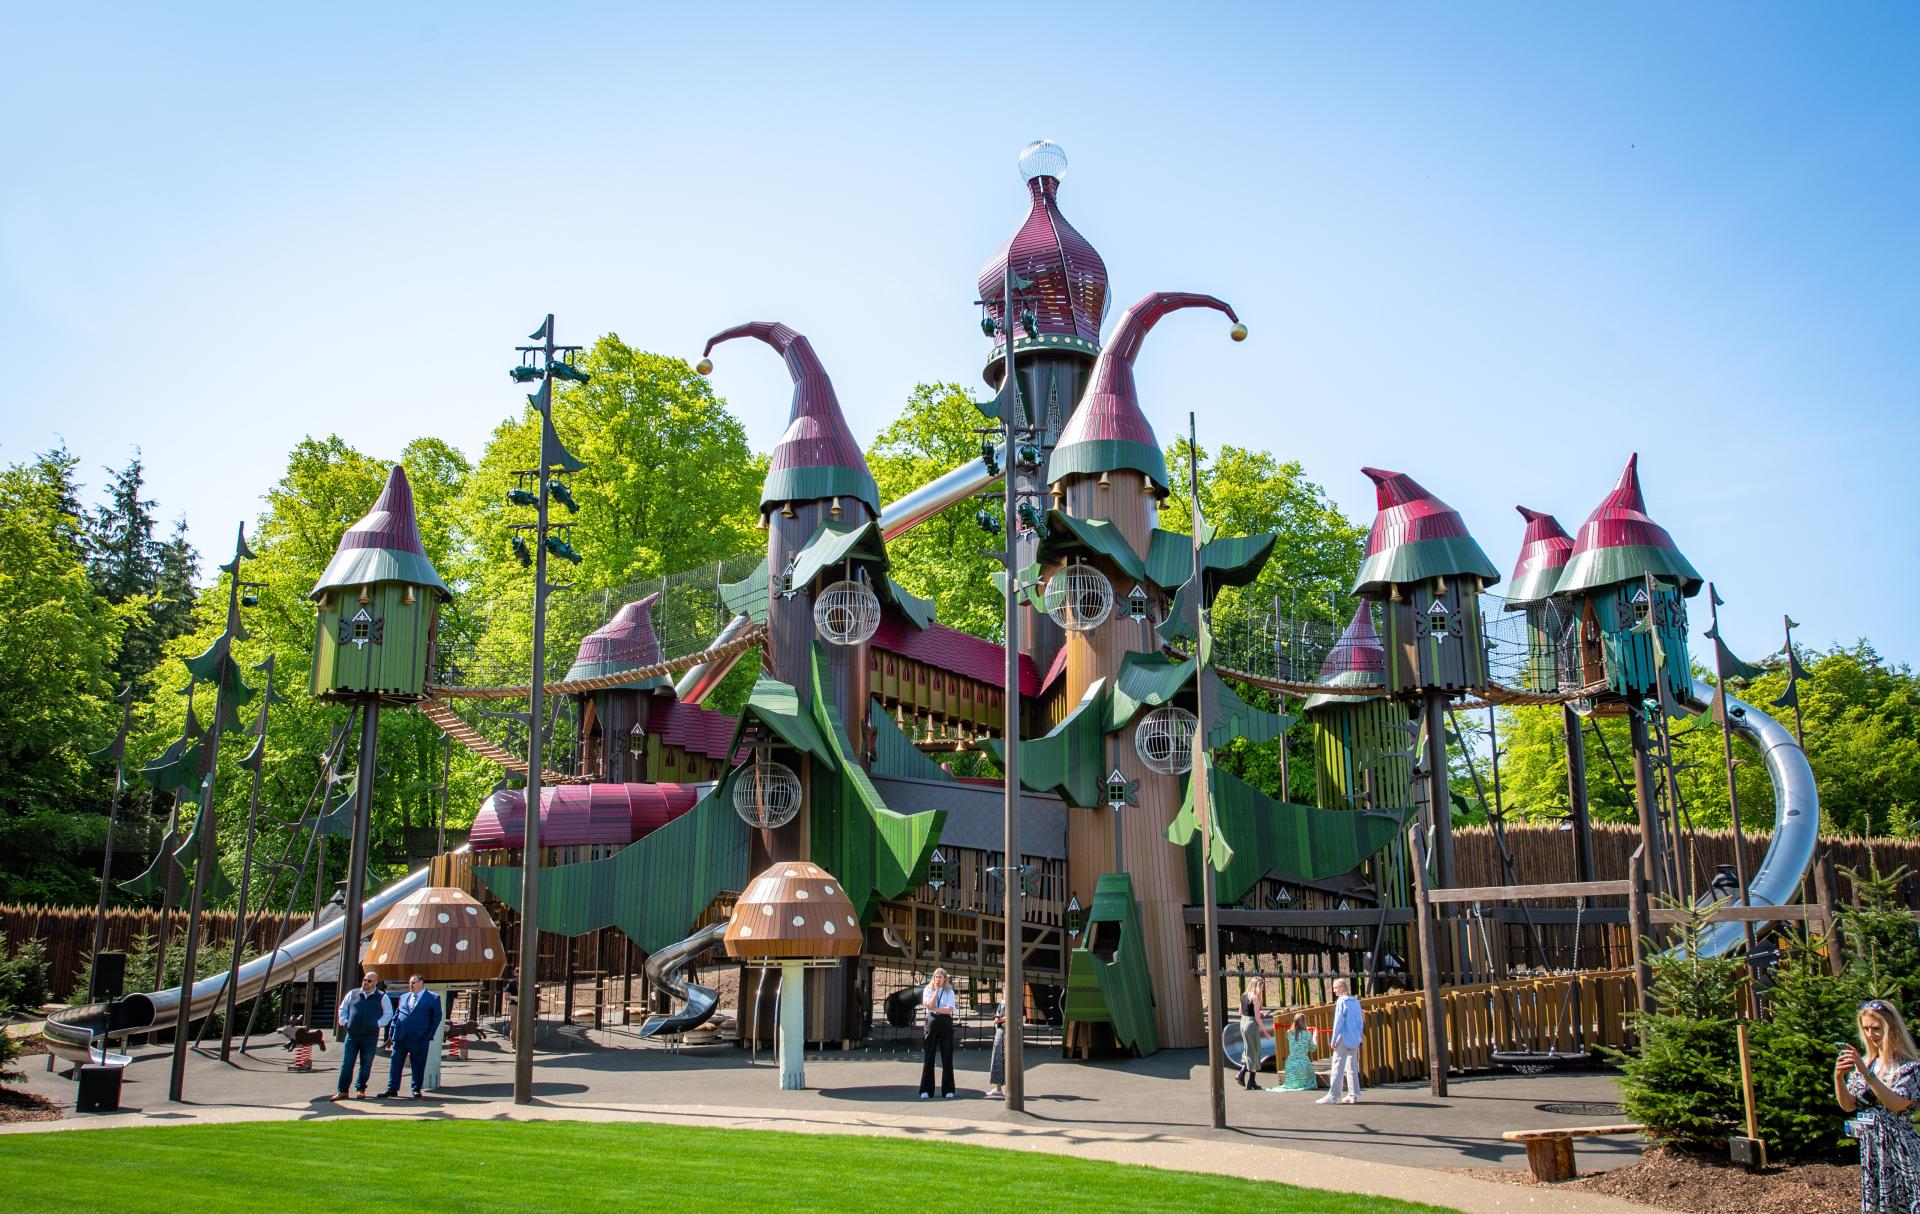 Full shot of Lilidorei - wooden play castle at The Alnwick Garden